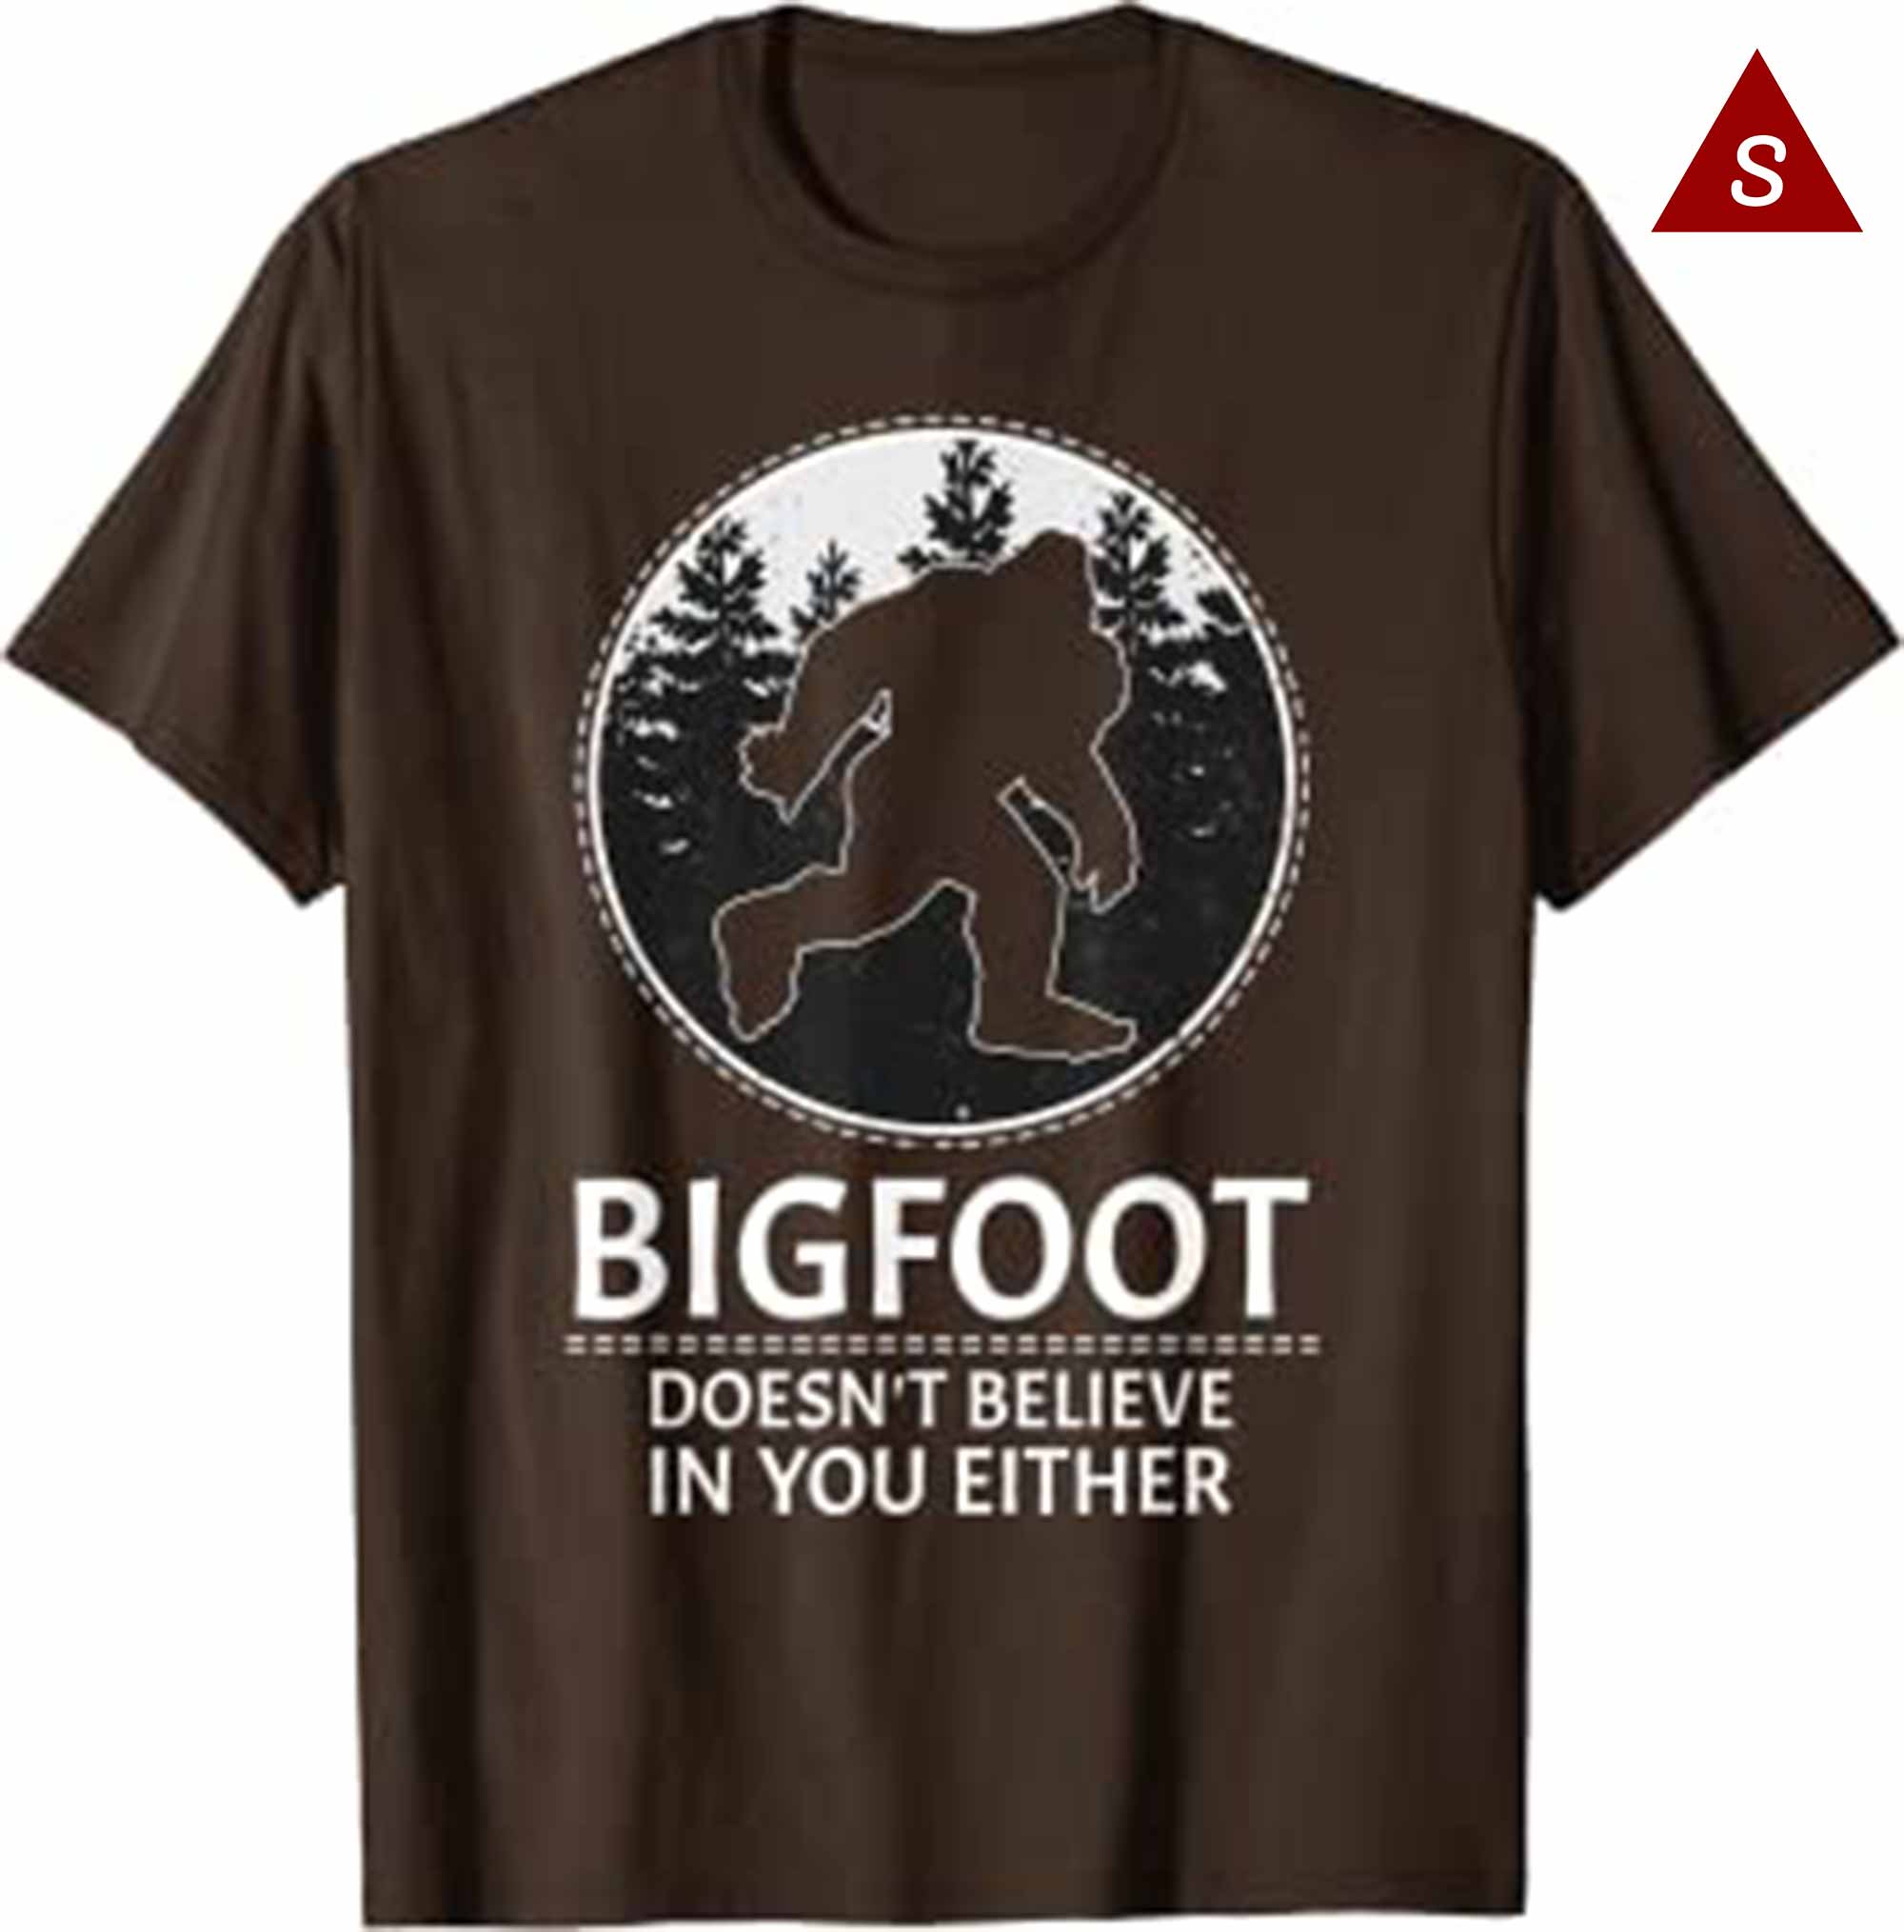 Skitongift Bigfoot Doesnt Believe In You Either Gift T Shirt